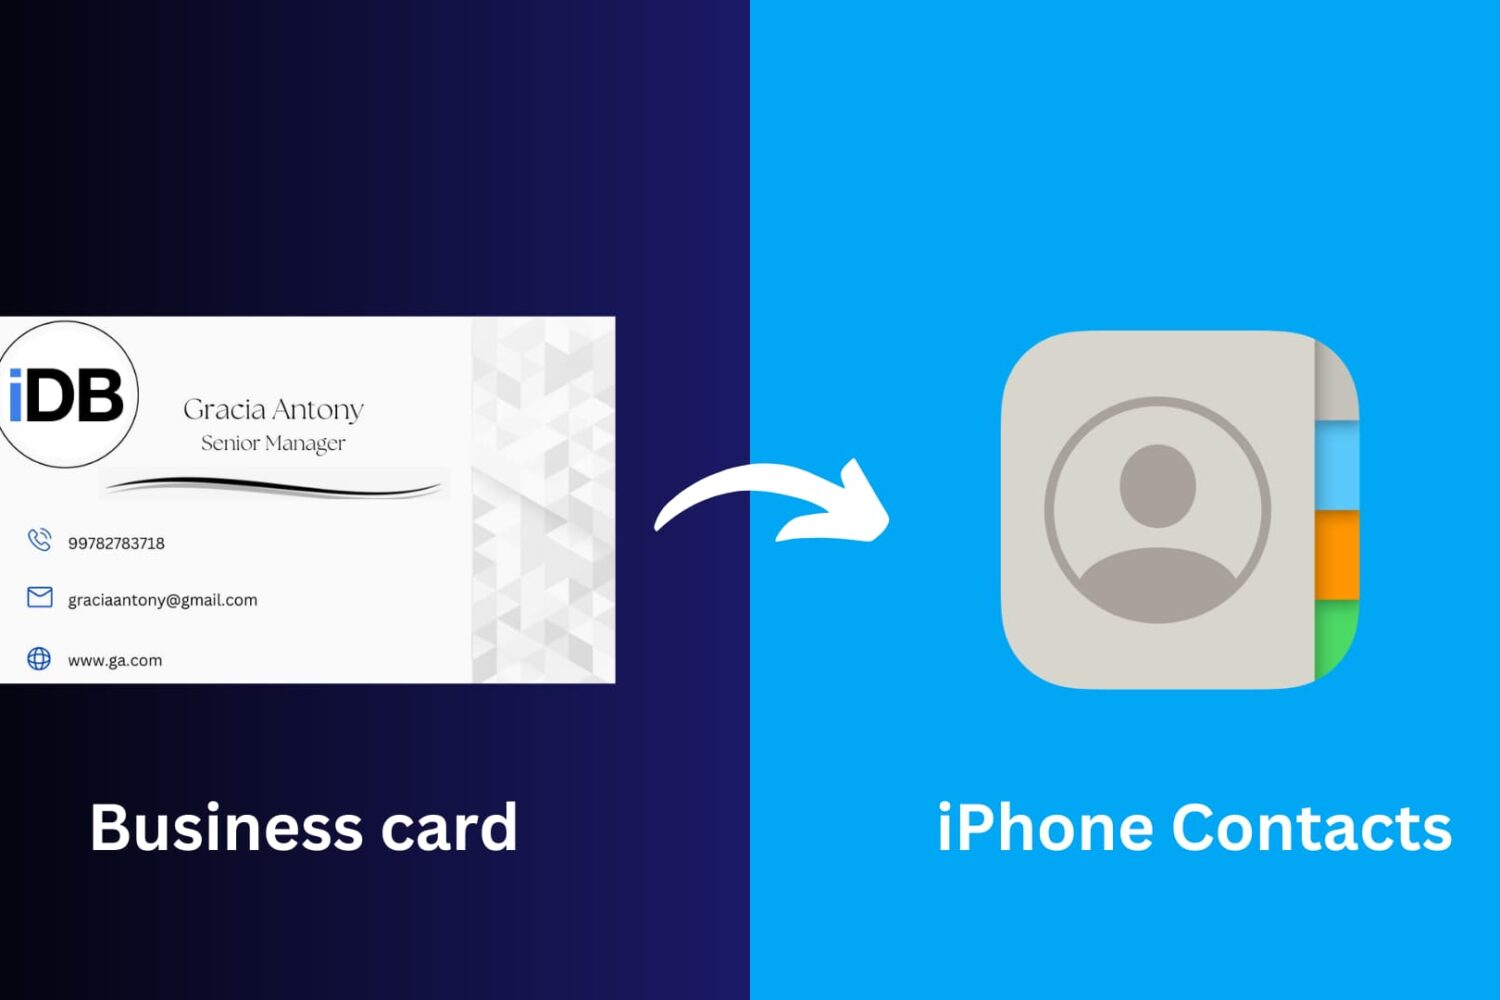 Scan Business Card and add it to iPhone Contacts